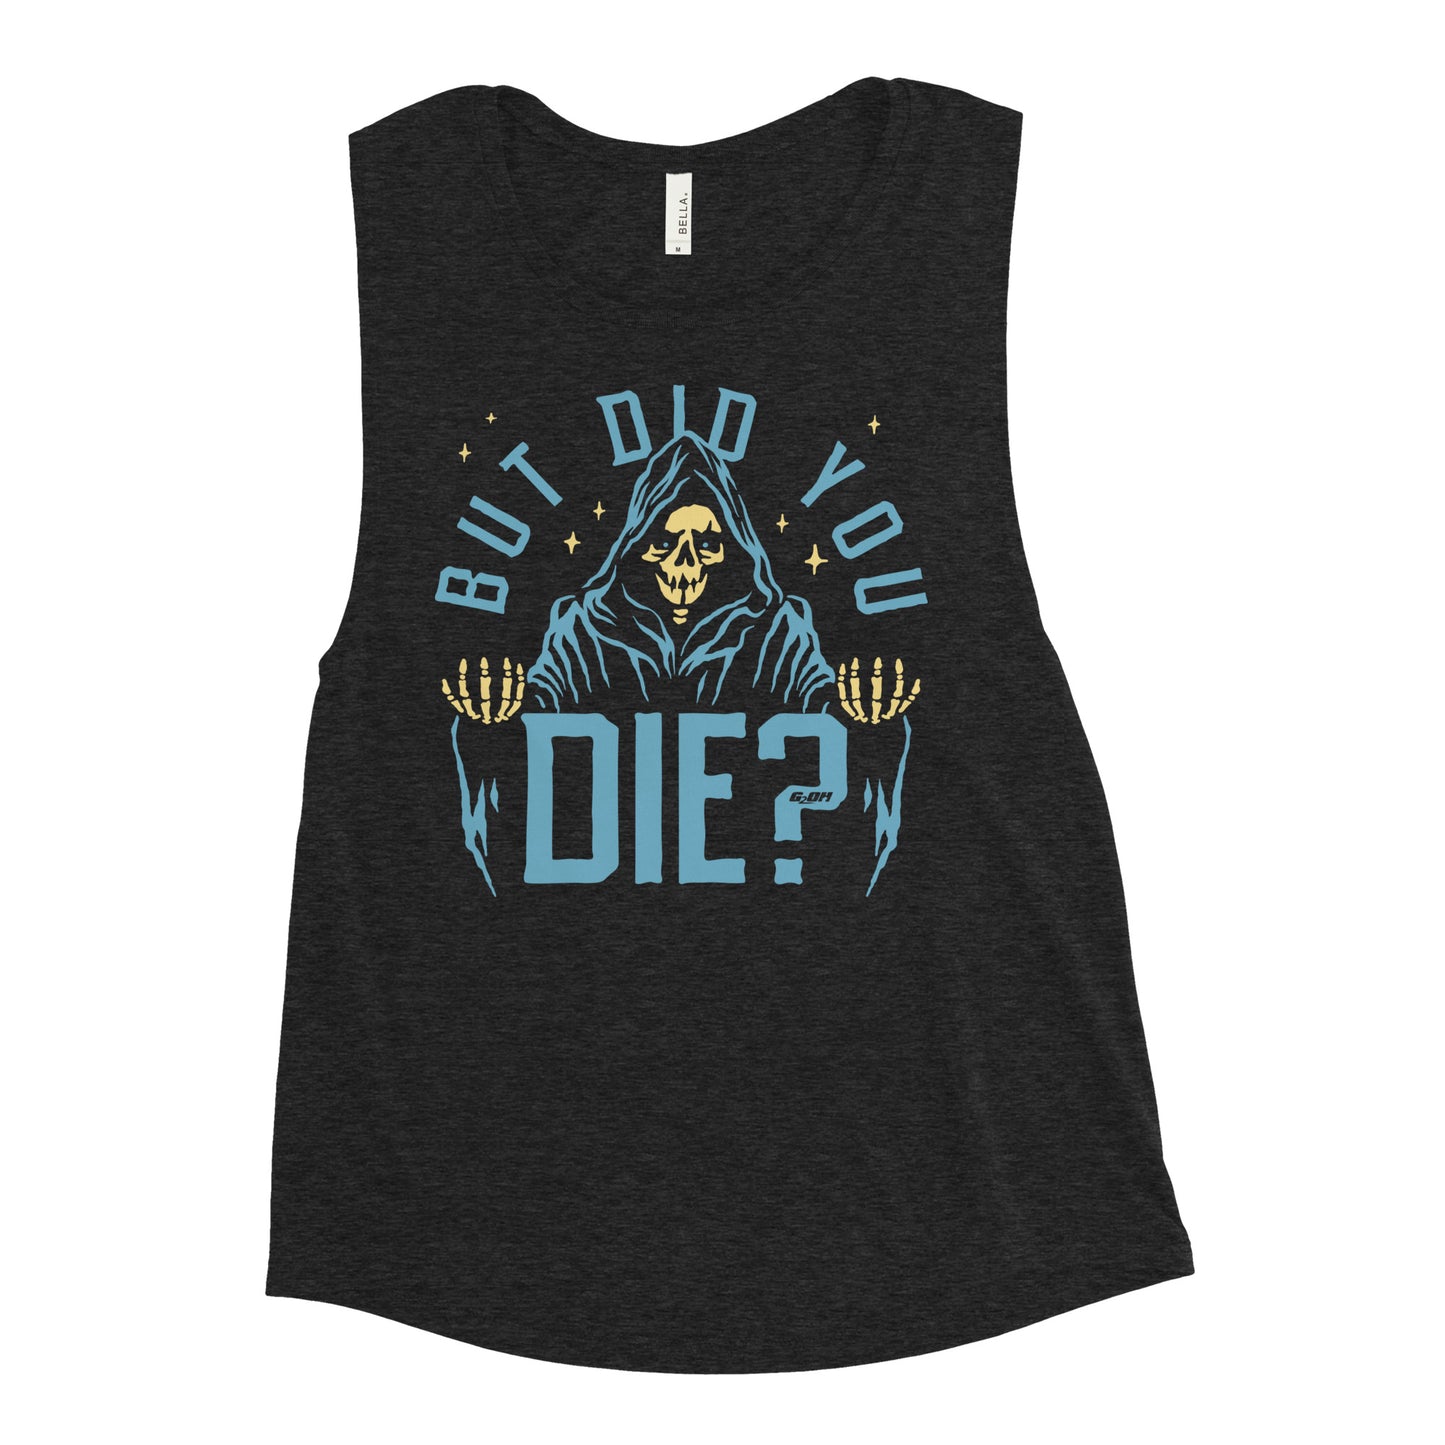 But Did You Die? Women's Muscle Tank